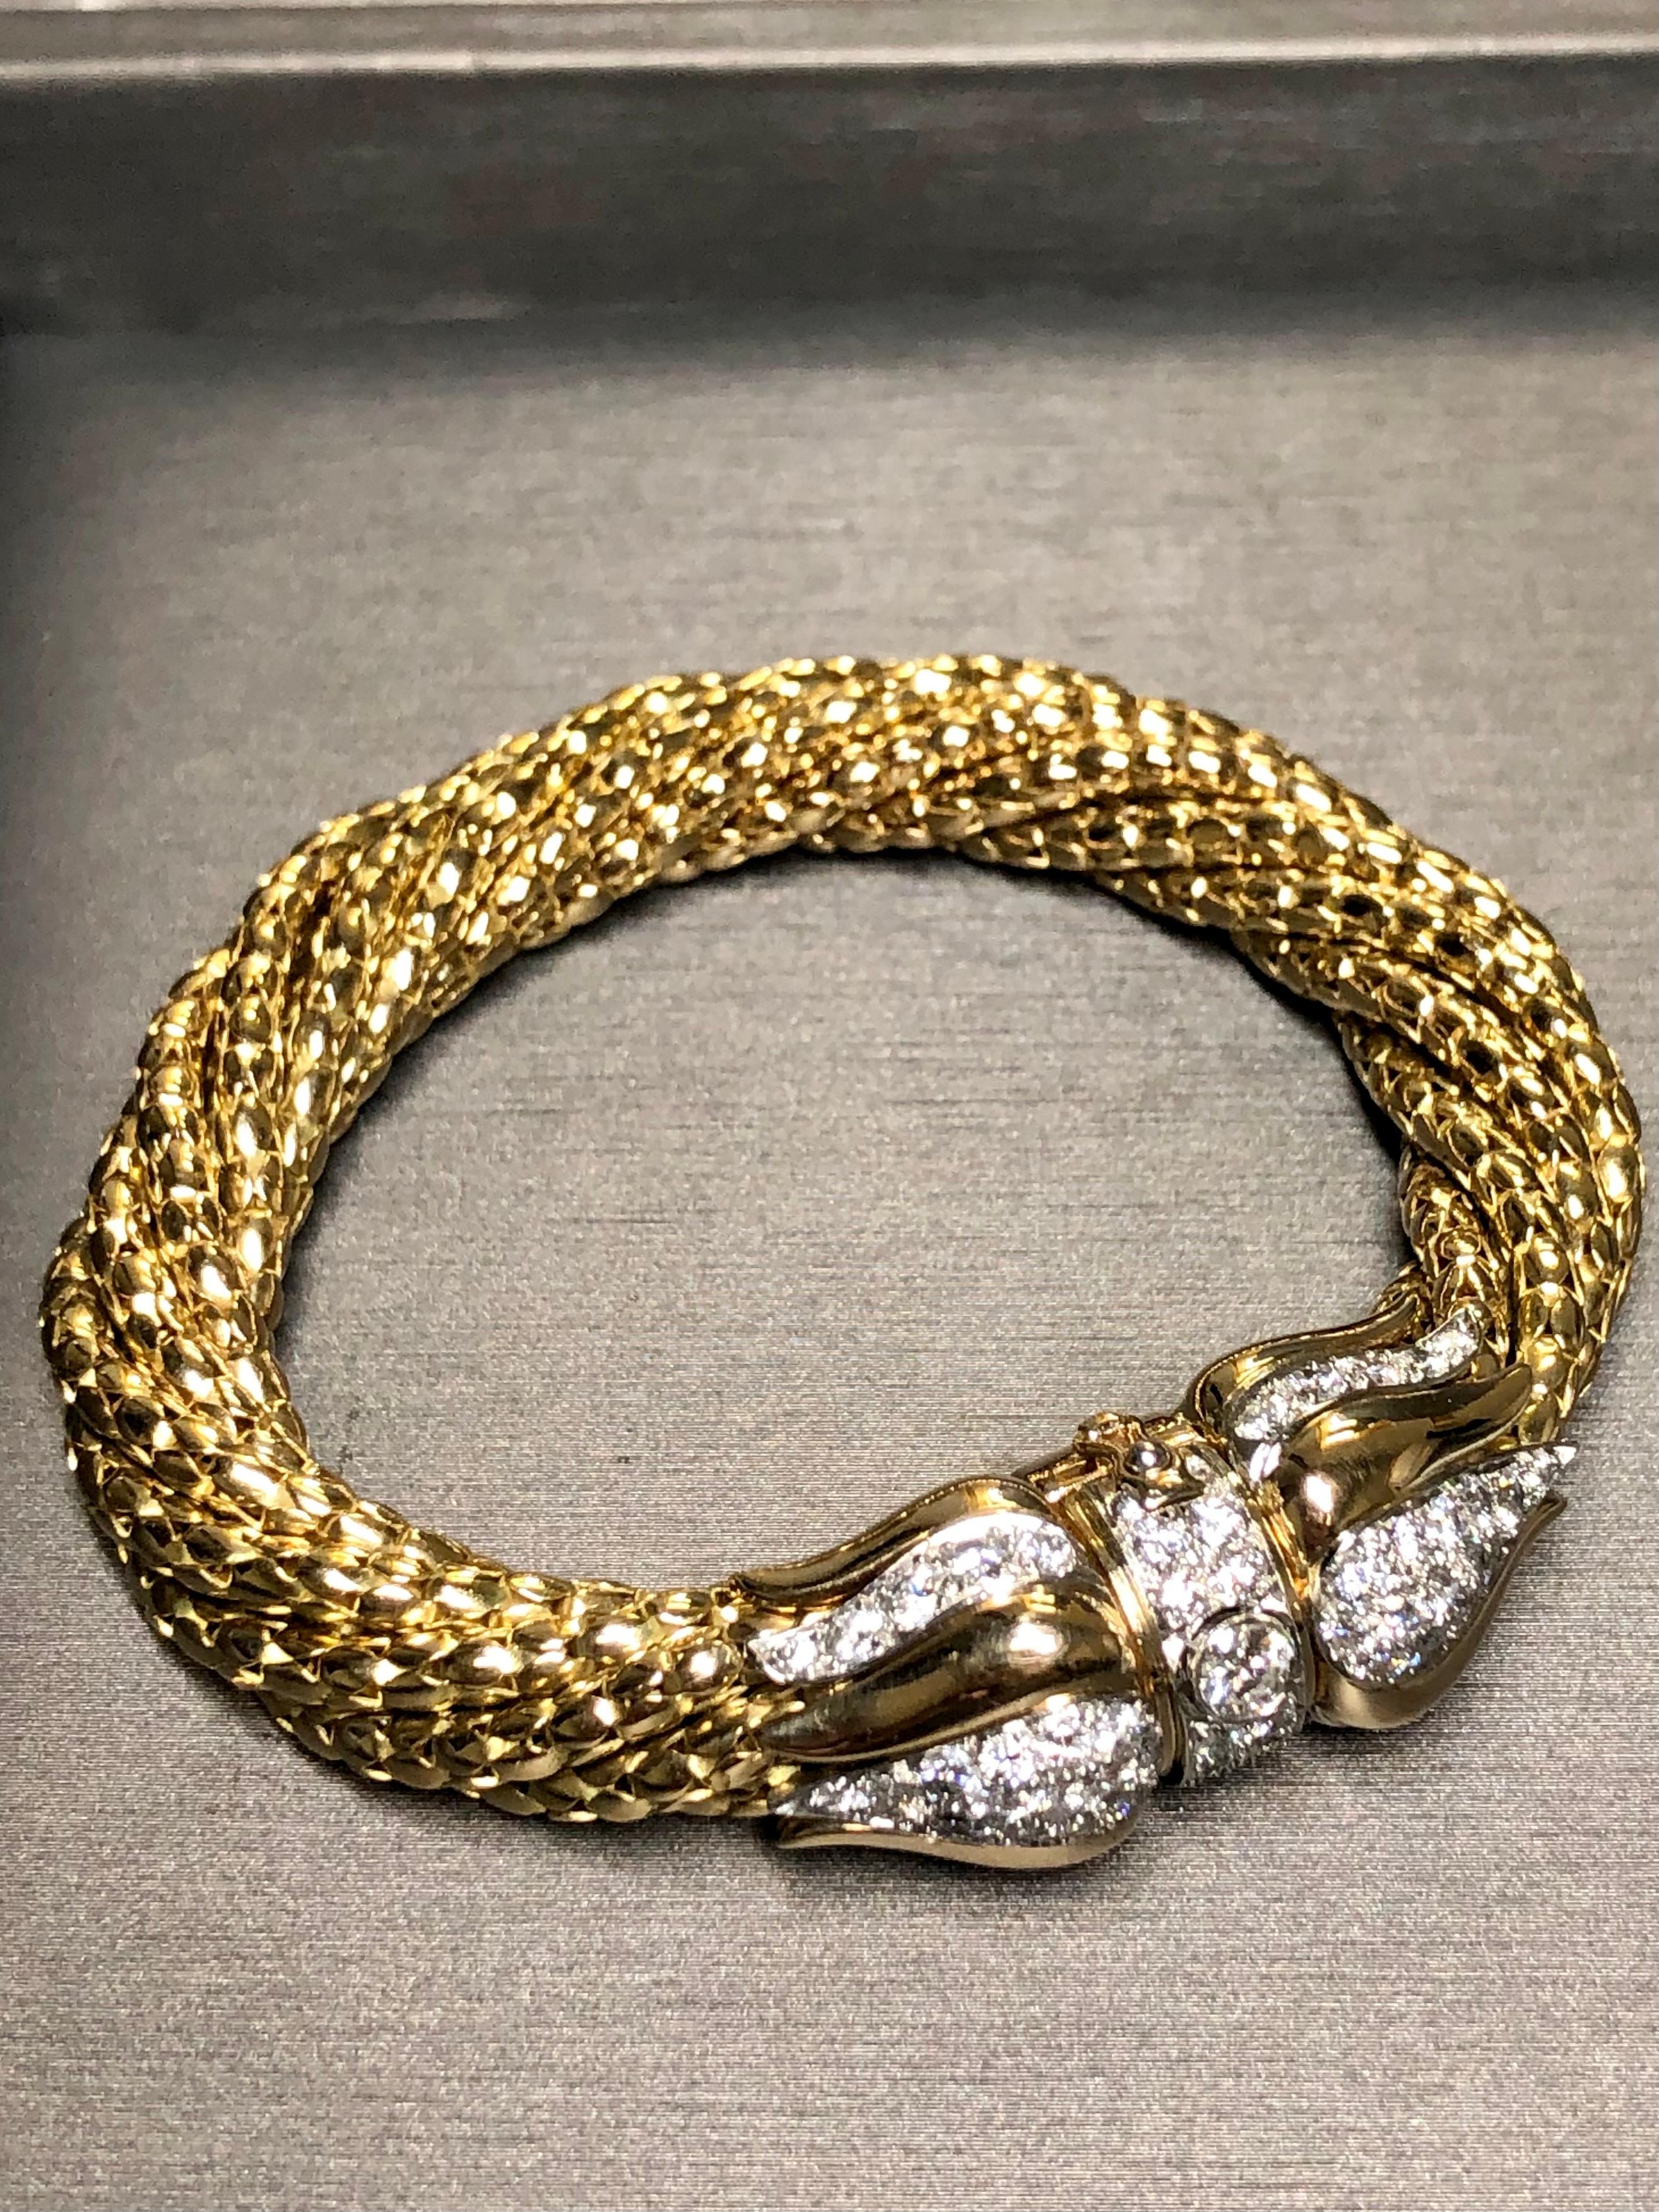 An incredibly well made bracelet done in 18K yellow gold and platinum comprised of 7 independent sections twisted together and held in place at either end. The piece is finished off with an incredible clasp done in 18K and platinum and set with